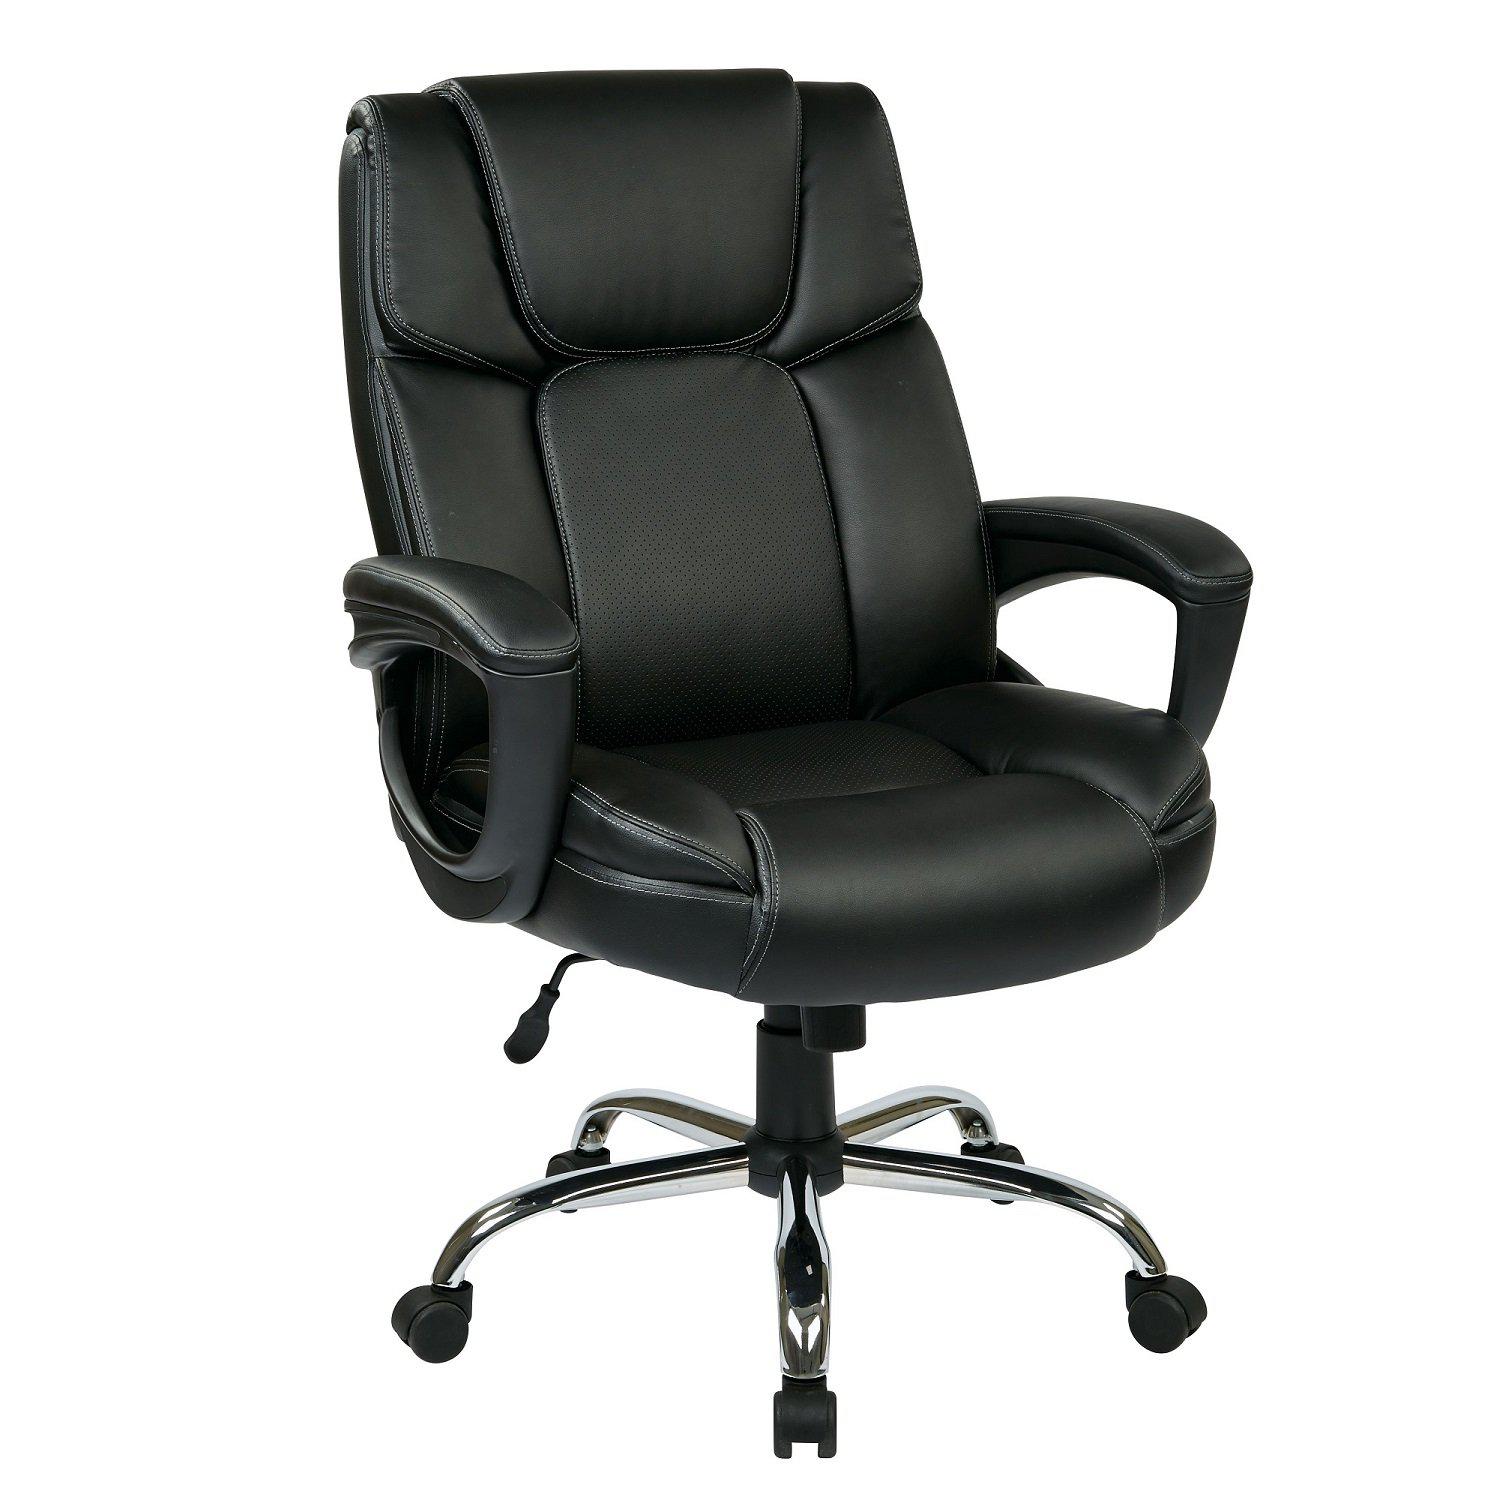 Executive Bonded Leather Big Man's Chair with Padded Loop Arms and Chrome Base